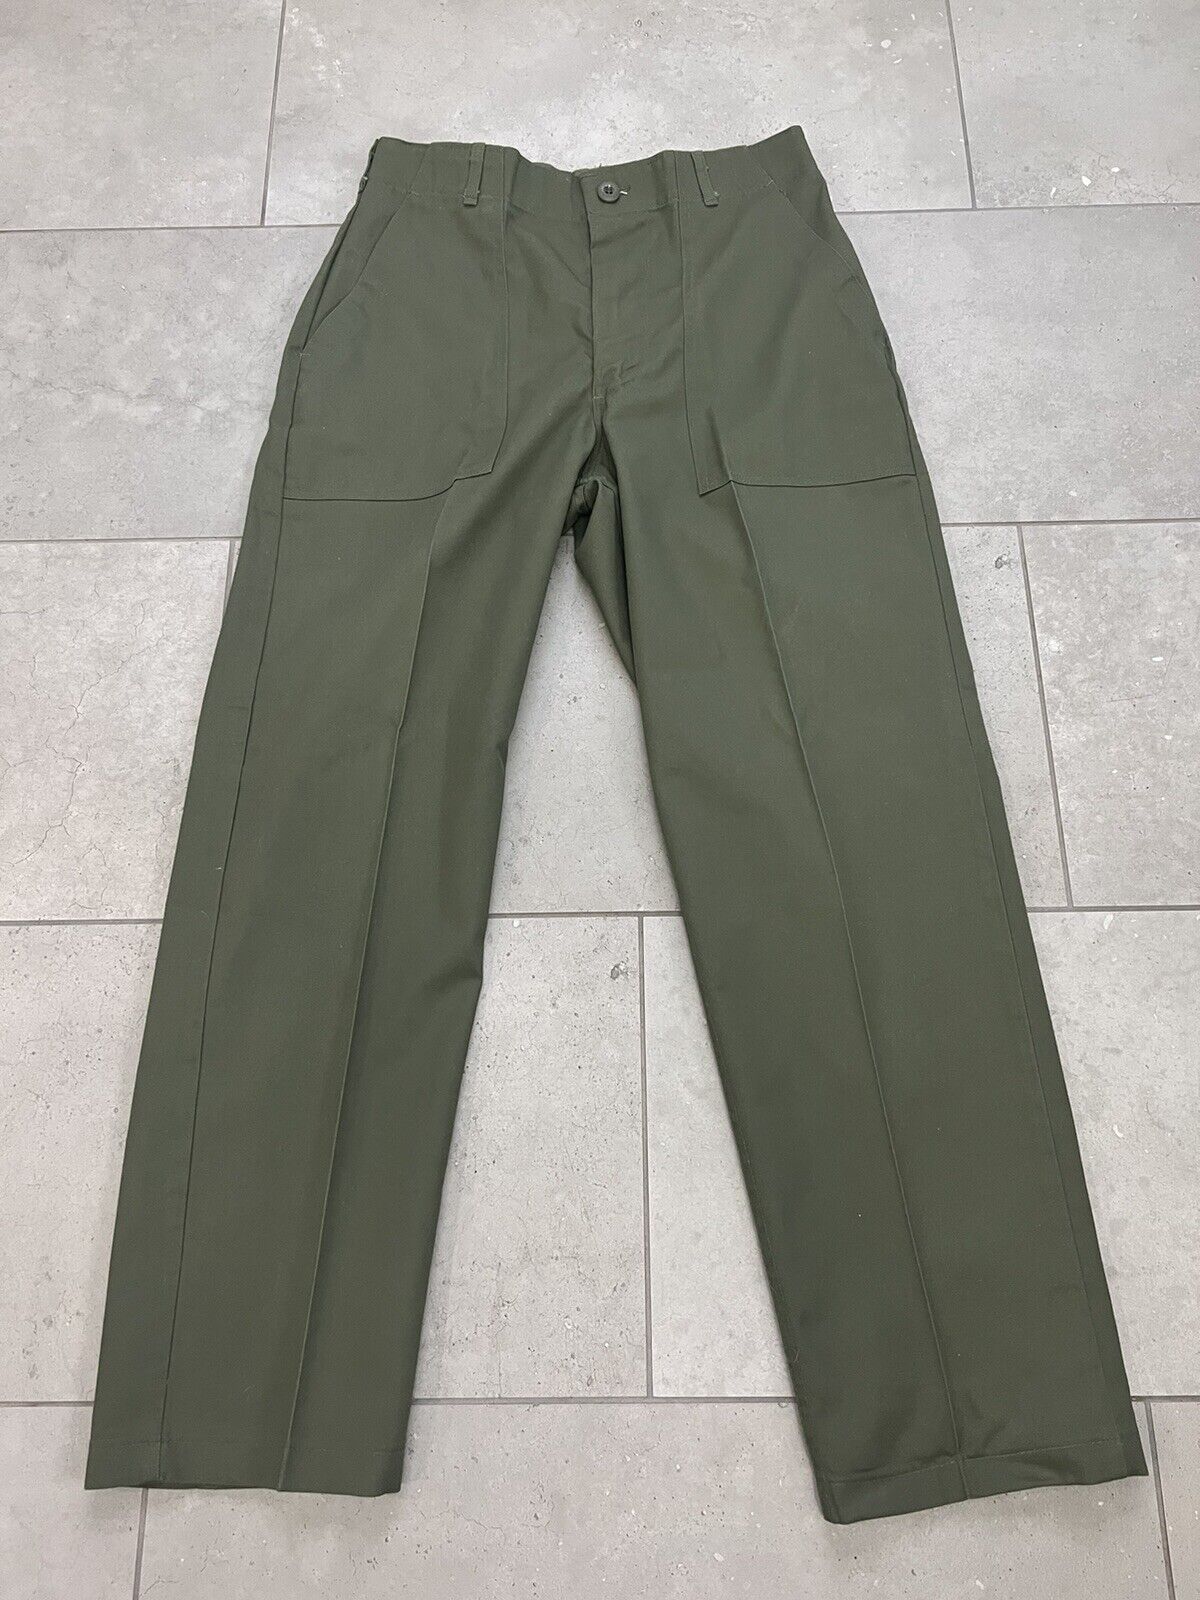 Vintage 1981 Durable Press OG 507 Army Trousers Military Fatigues Pants 32x29